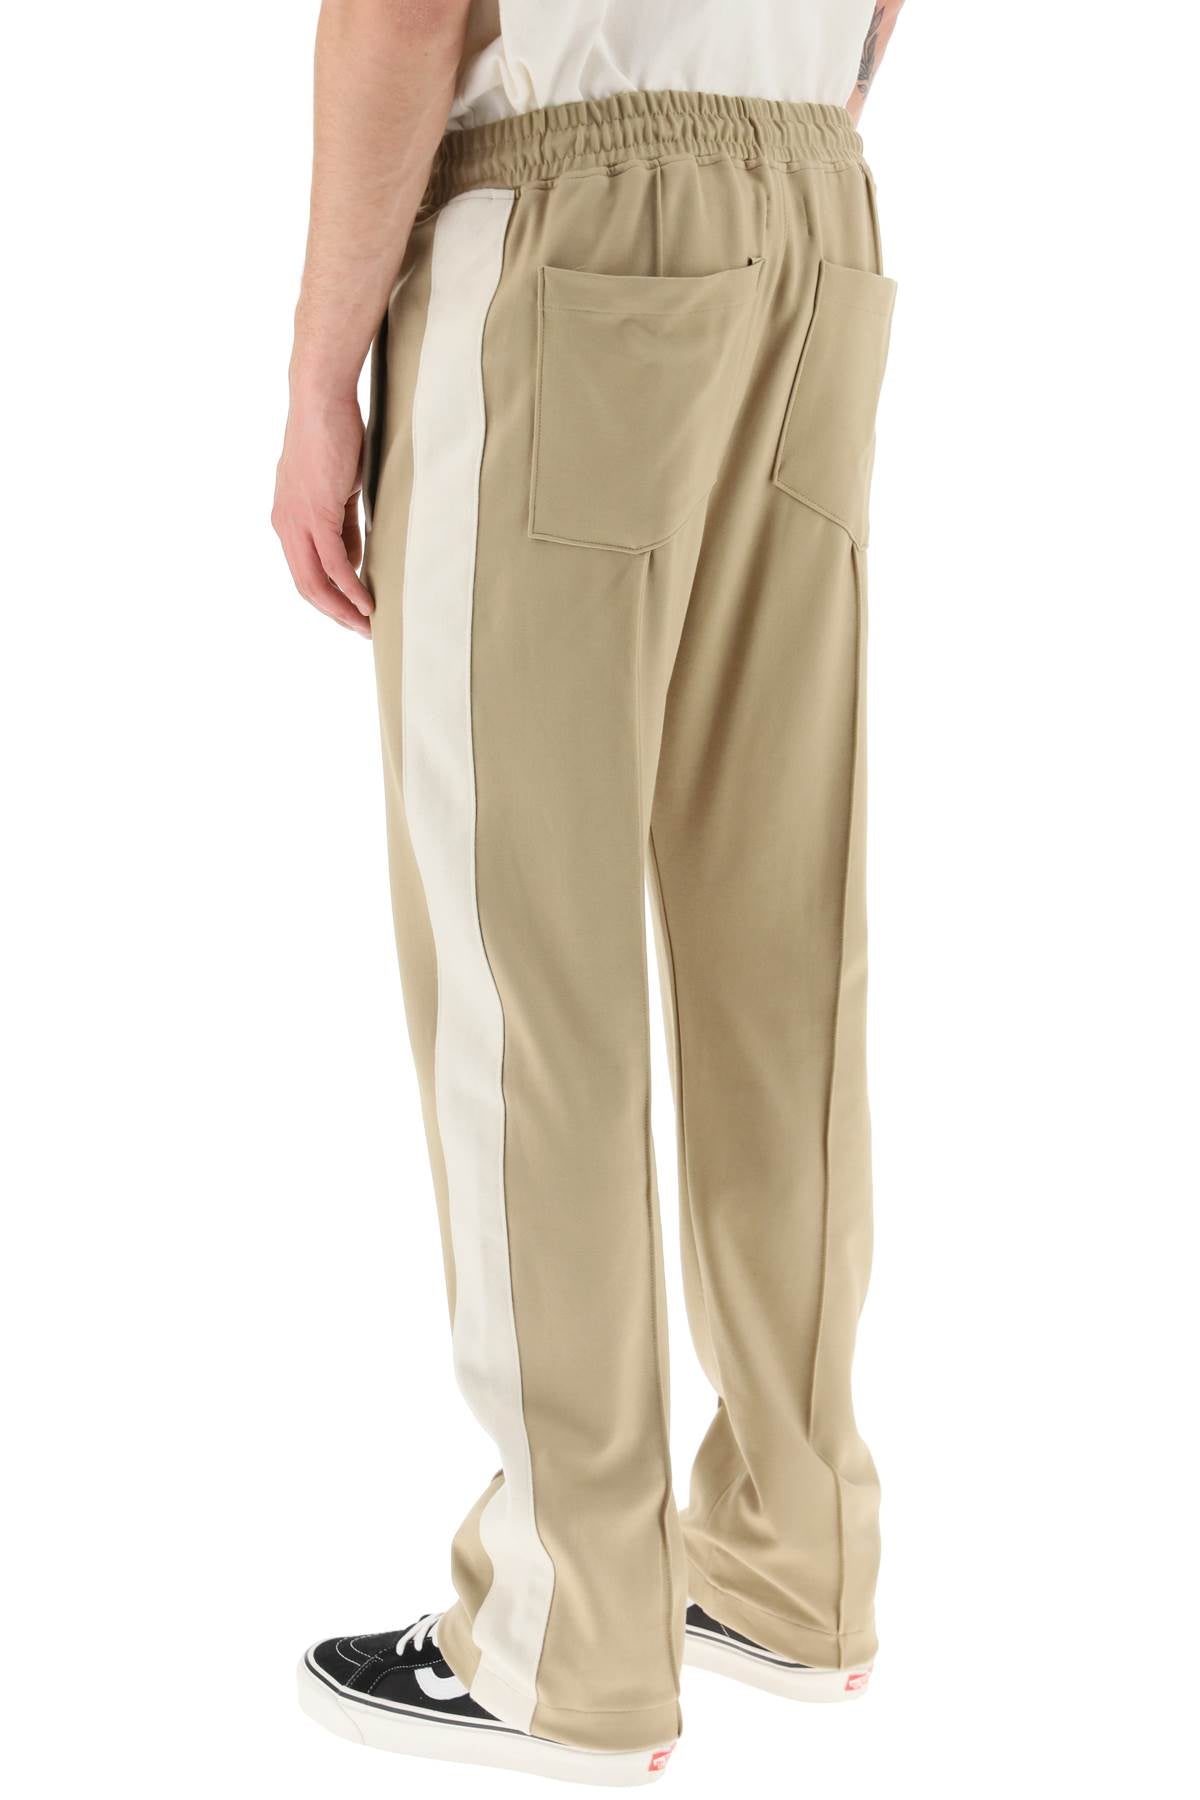 RHUDE Beige Straight-Leg T-Shirt Pants with Contrast Bands and Mustard Drawstring